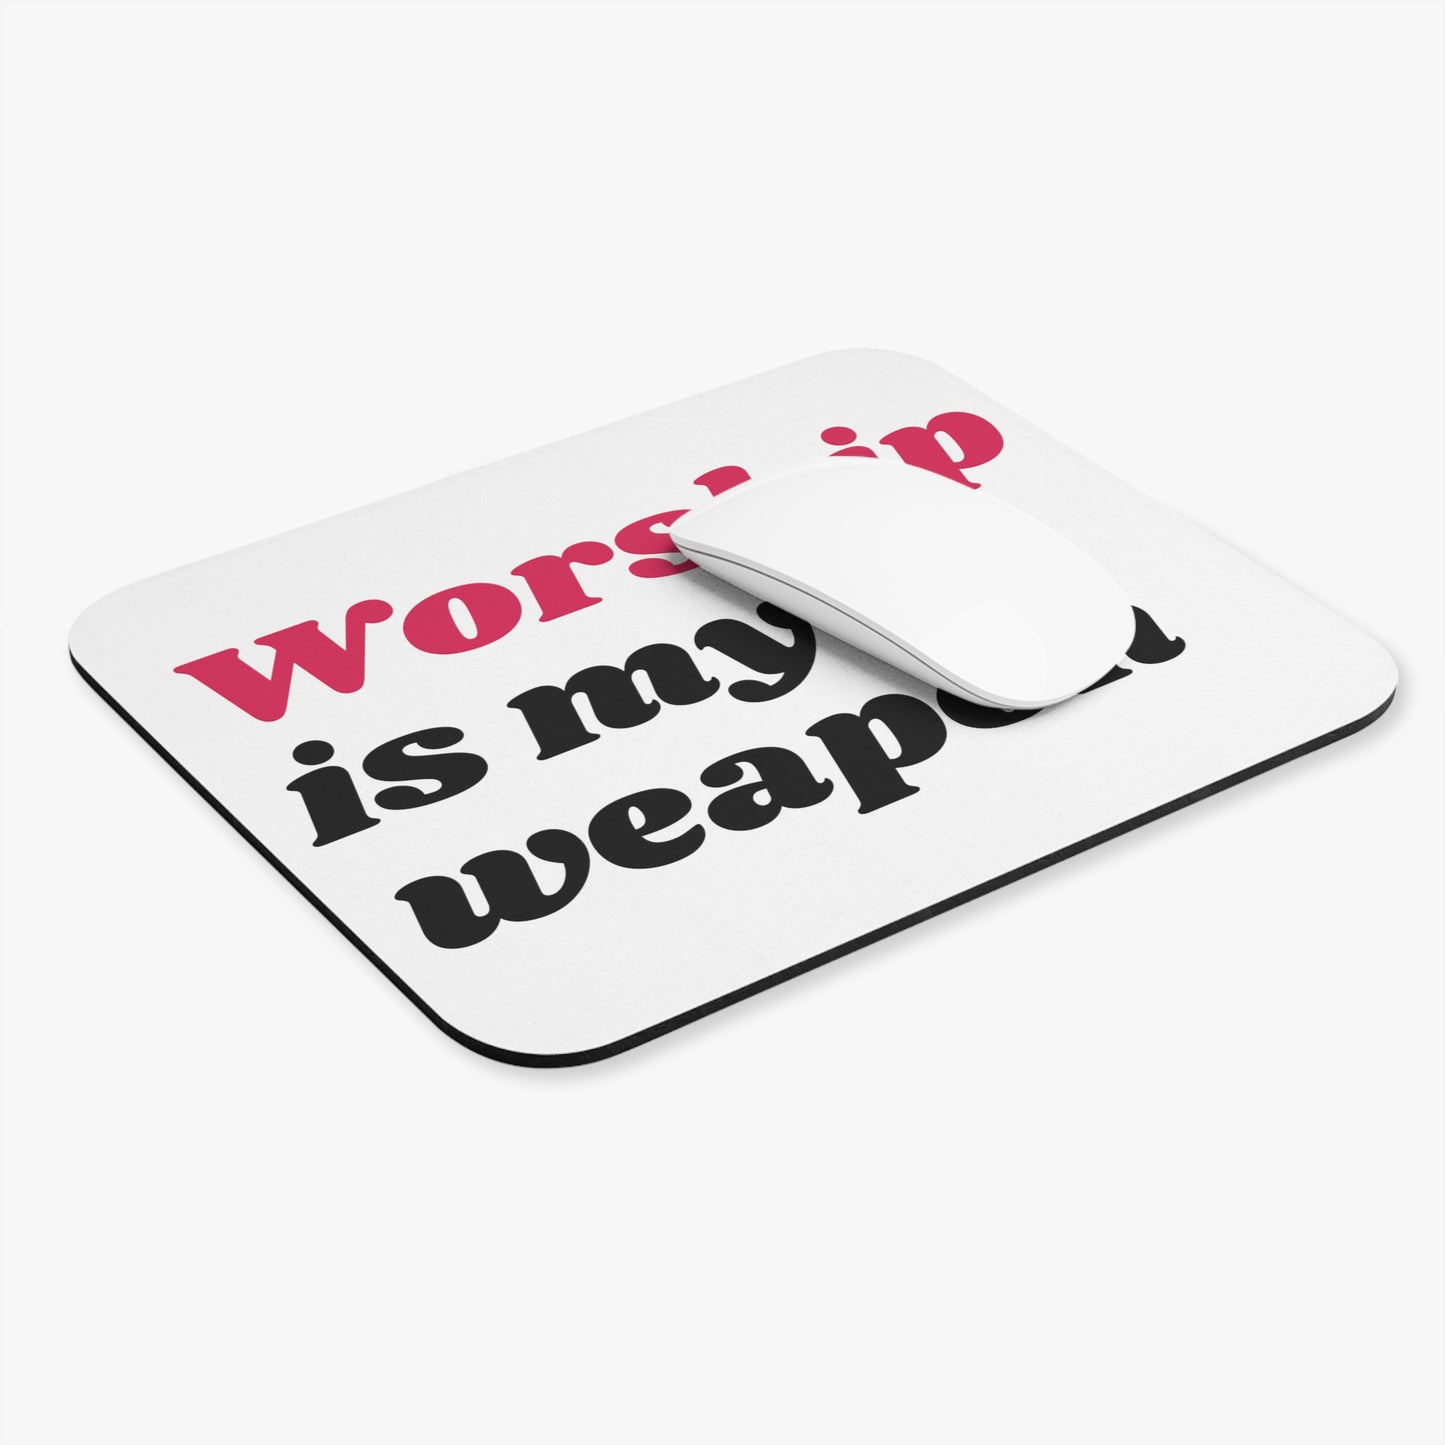 Worship is My Weapon Mouse Pad, Christian Mouse Pad, Faith Mouse Pad